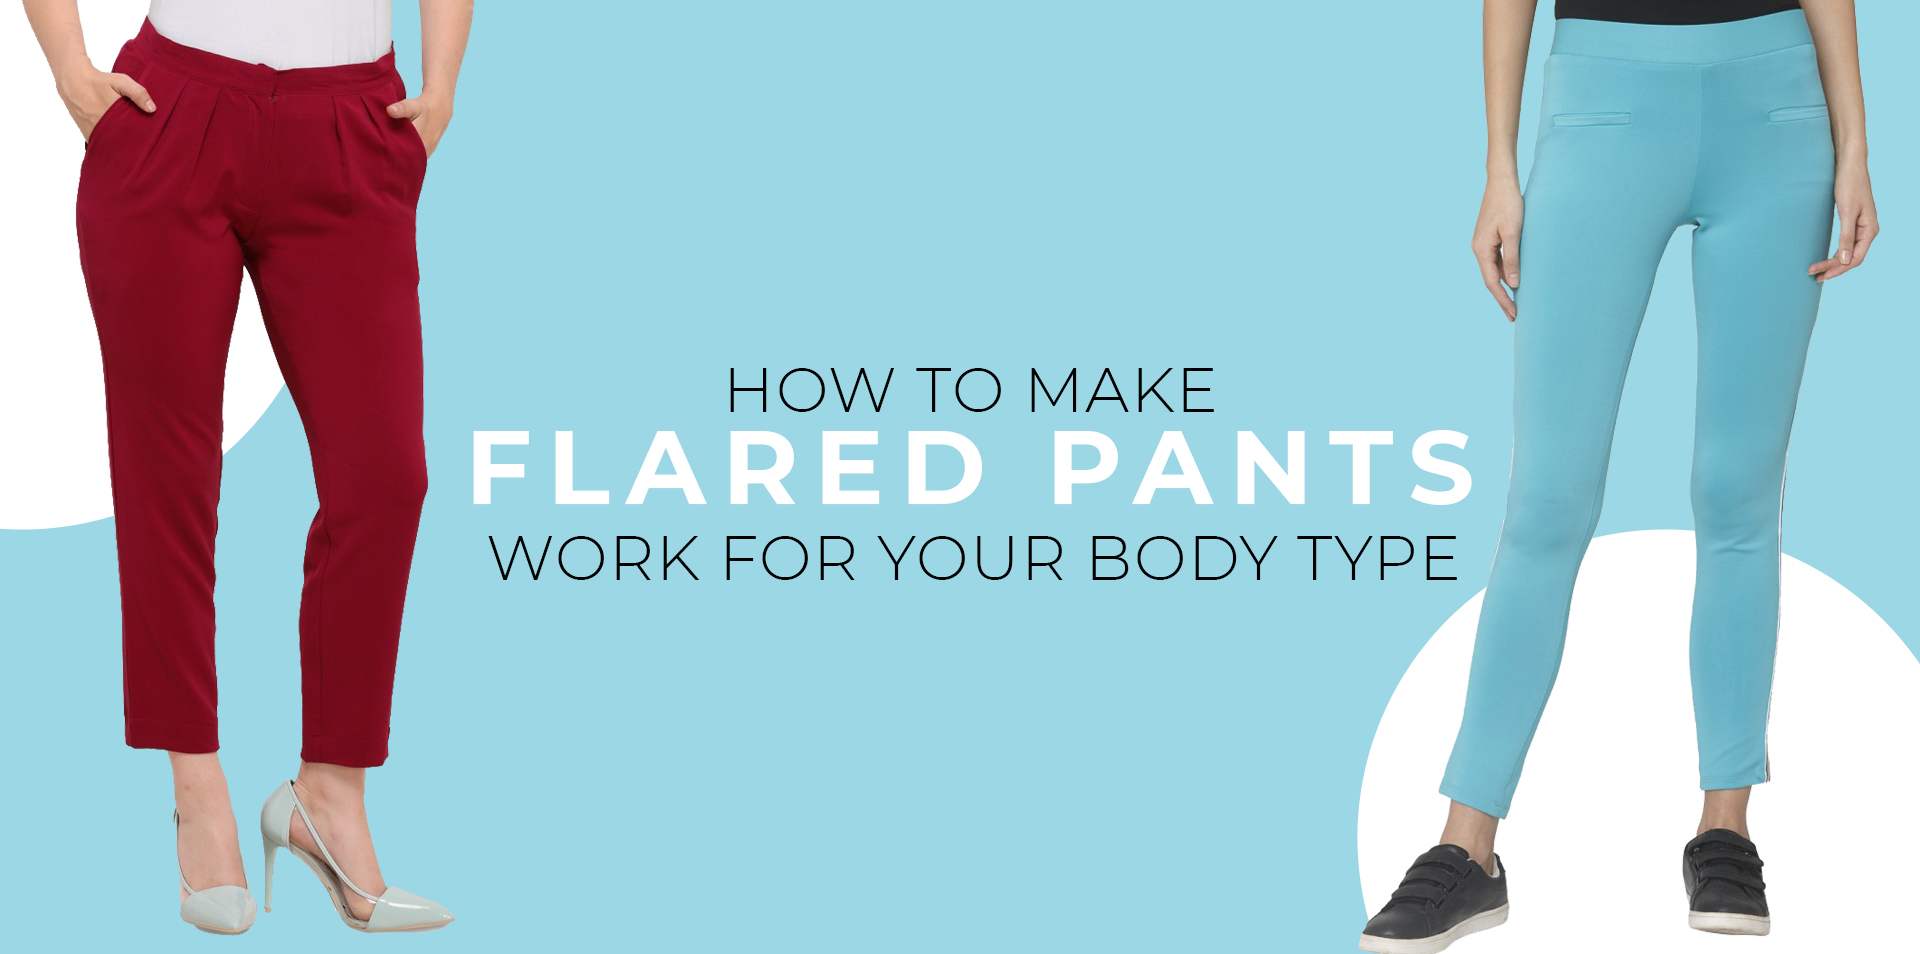 How to make flared pants work for your body type